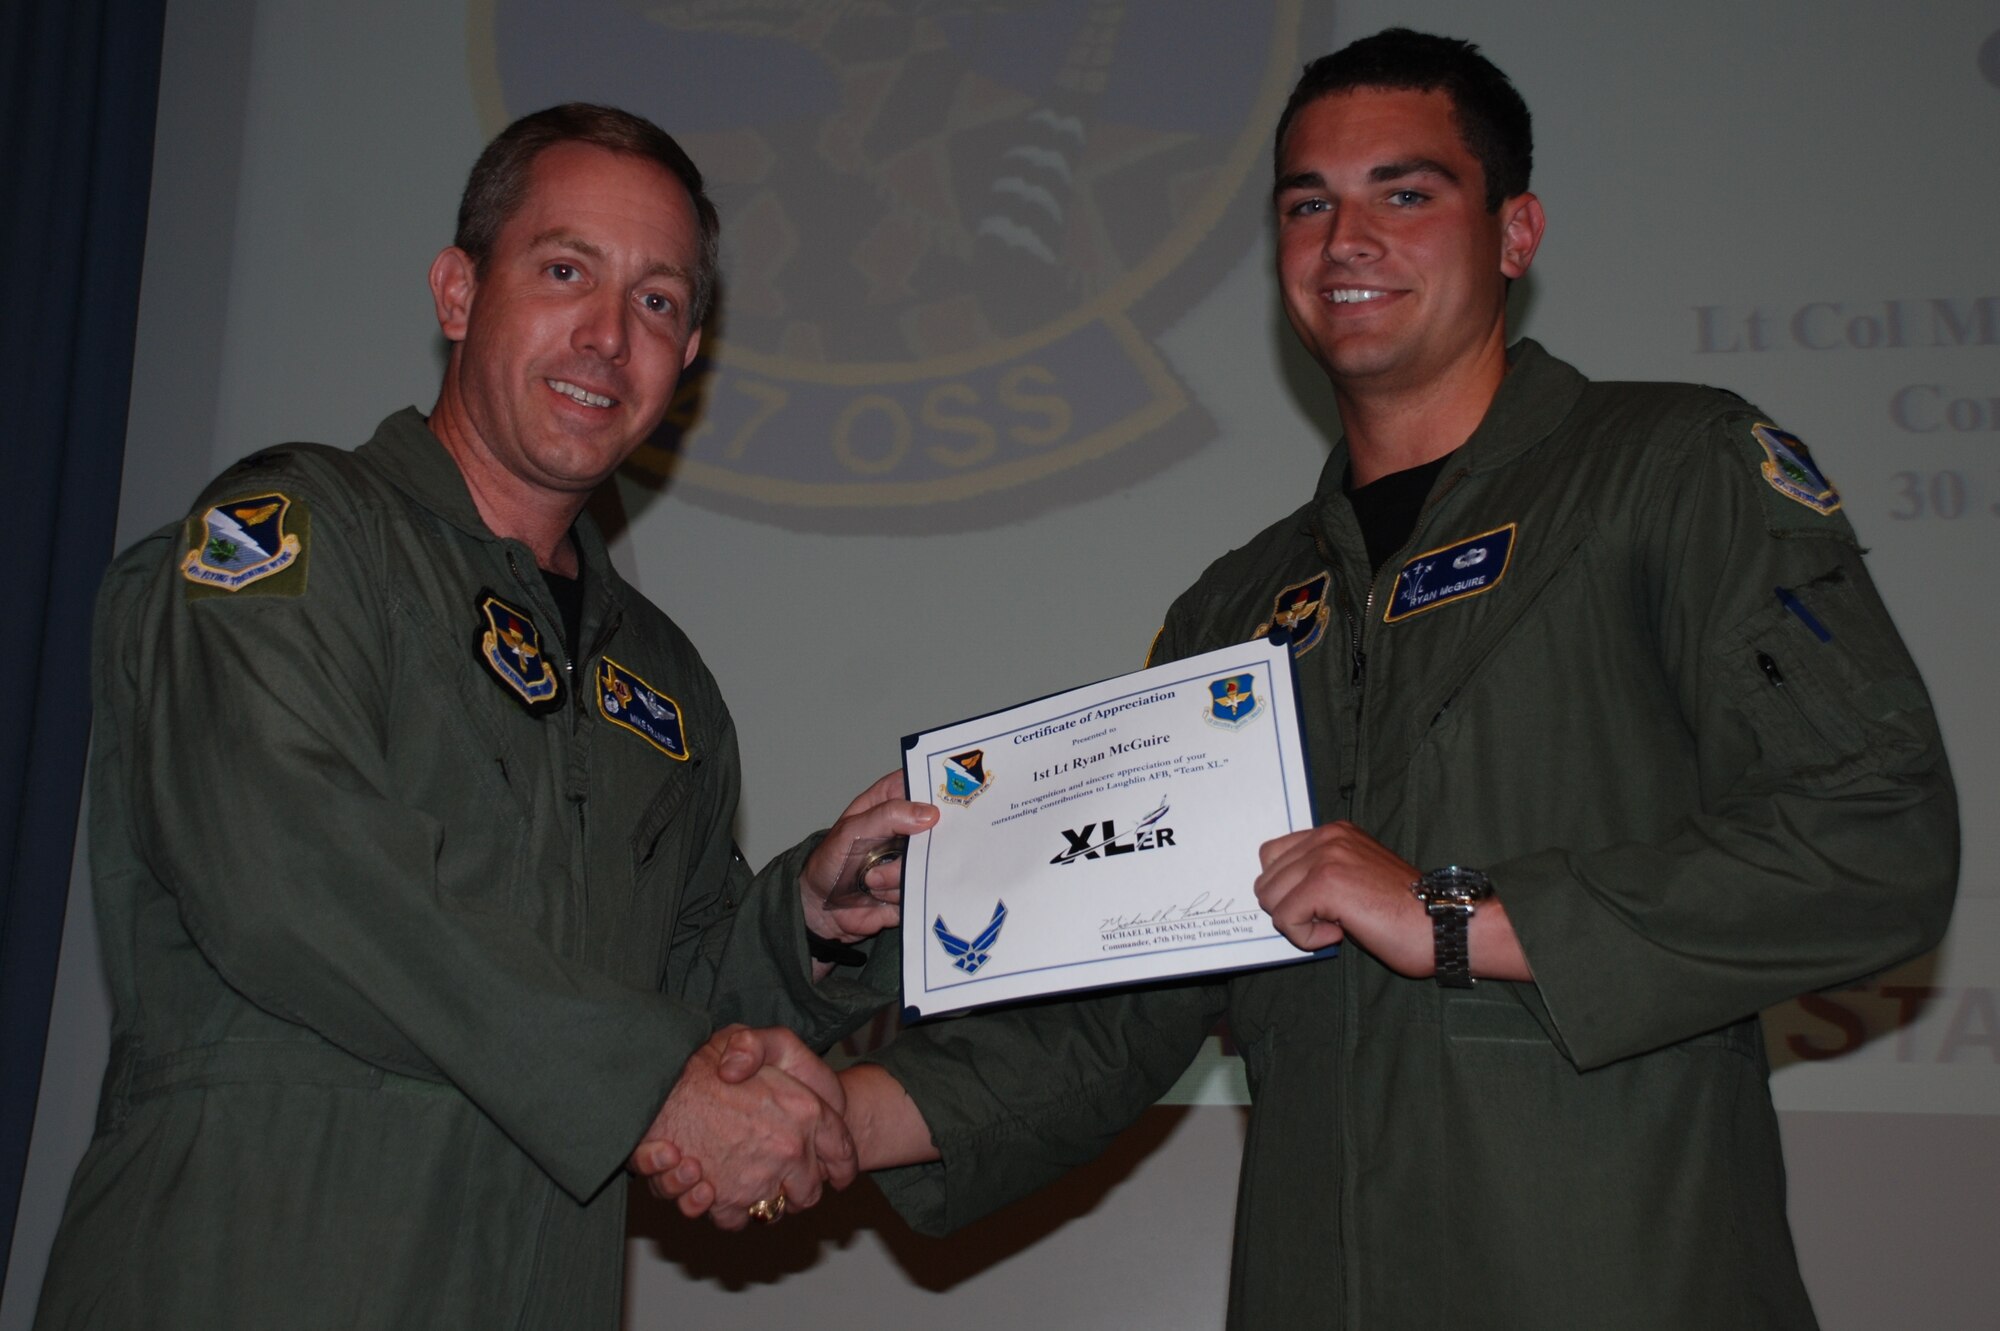 LAUGHLIN AIR FORCE BASE, Texas – First Lt. Ryan McGuire, 47th Operations Support Squadron, is presented the XLer of the Week award by Col. Michael Frankel, 47th Flying Training Wing commander, June 30. The XLer is a weekly award chosen by 47th FTW leadership and given to individuals who consistently make outstanding contributions to Laughlin and their unit. (U.S. Air Force photo by Airman 1st Class Blake Mize)